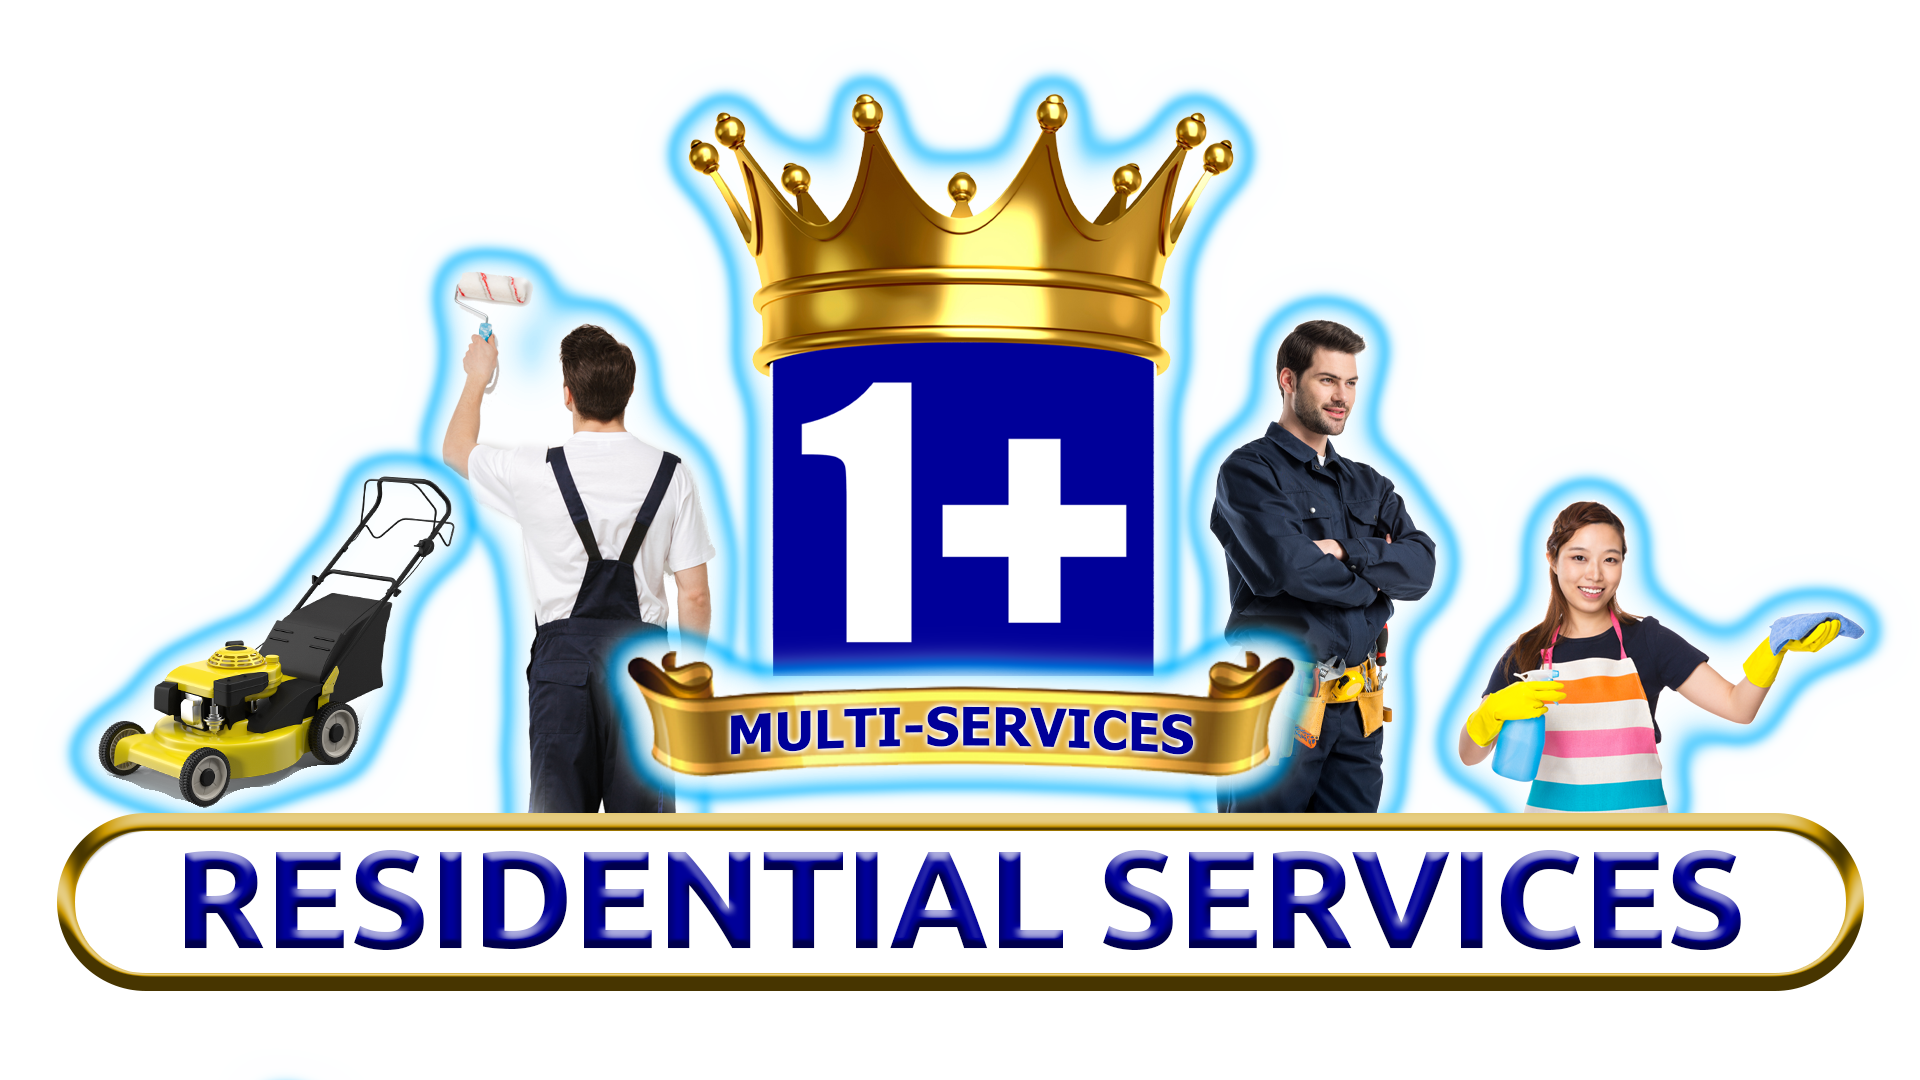 Home Multi Services -- Cleaning - Lawn Care - Paint - Errands - Houston Texas - Nassau Bay Texas - Seabrook Texas - Kemah Texas - Residential 1